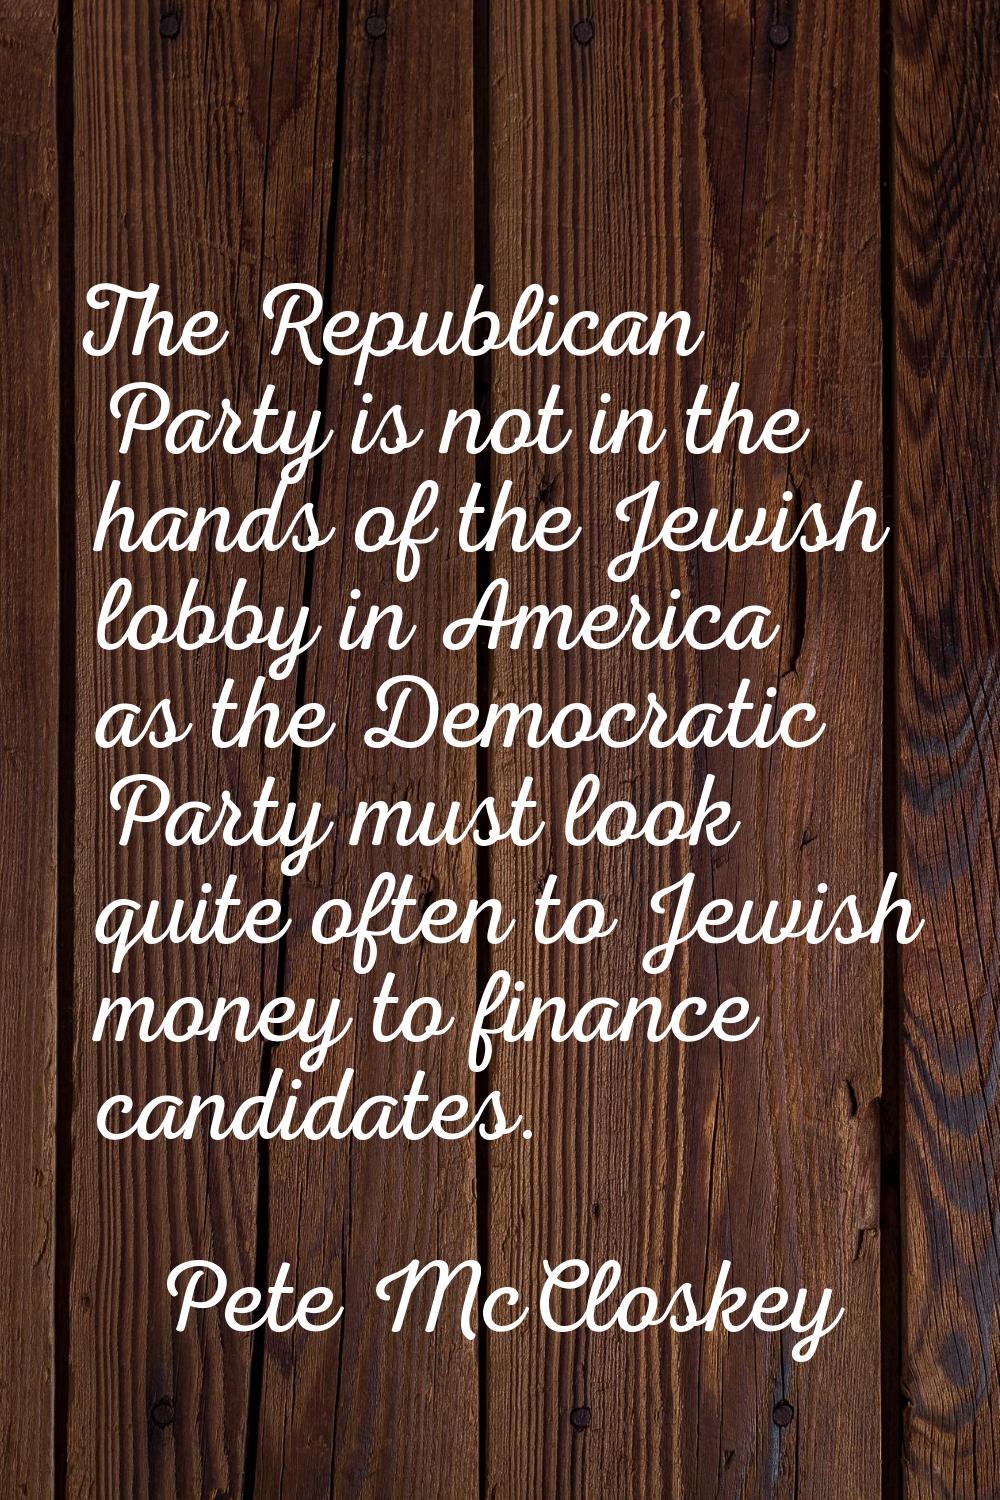 The Republican Party is not in the hands of the Jewish lobby in America as the Democratic Party mus